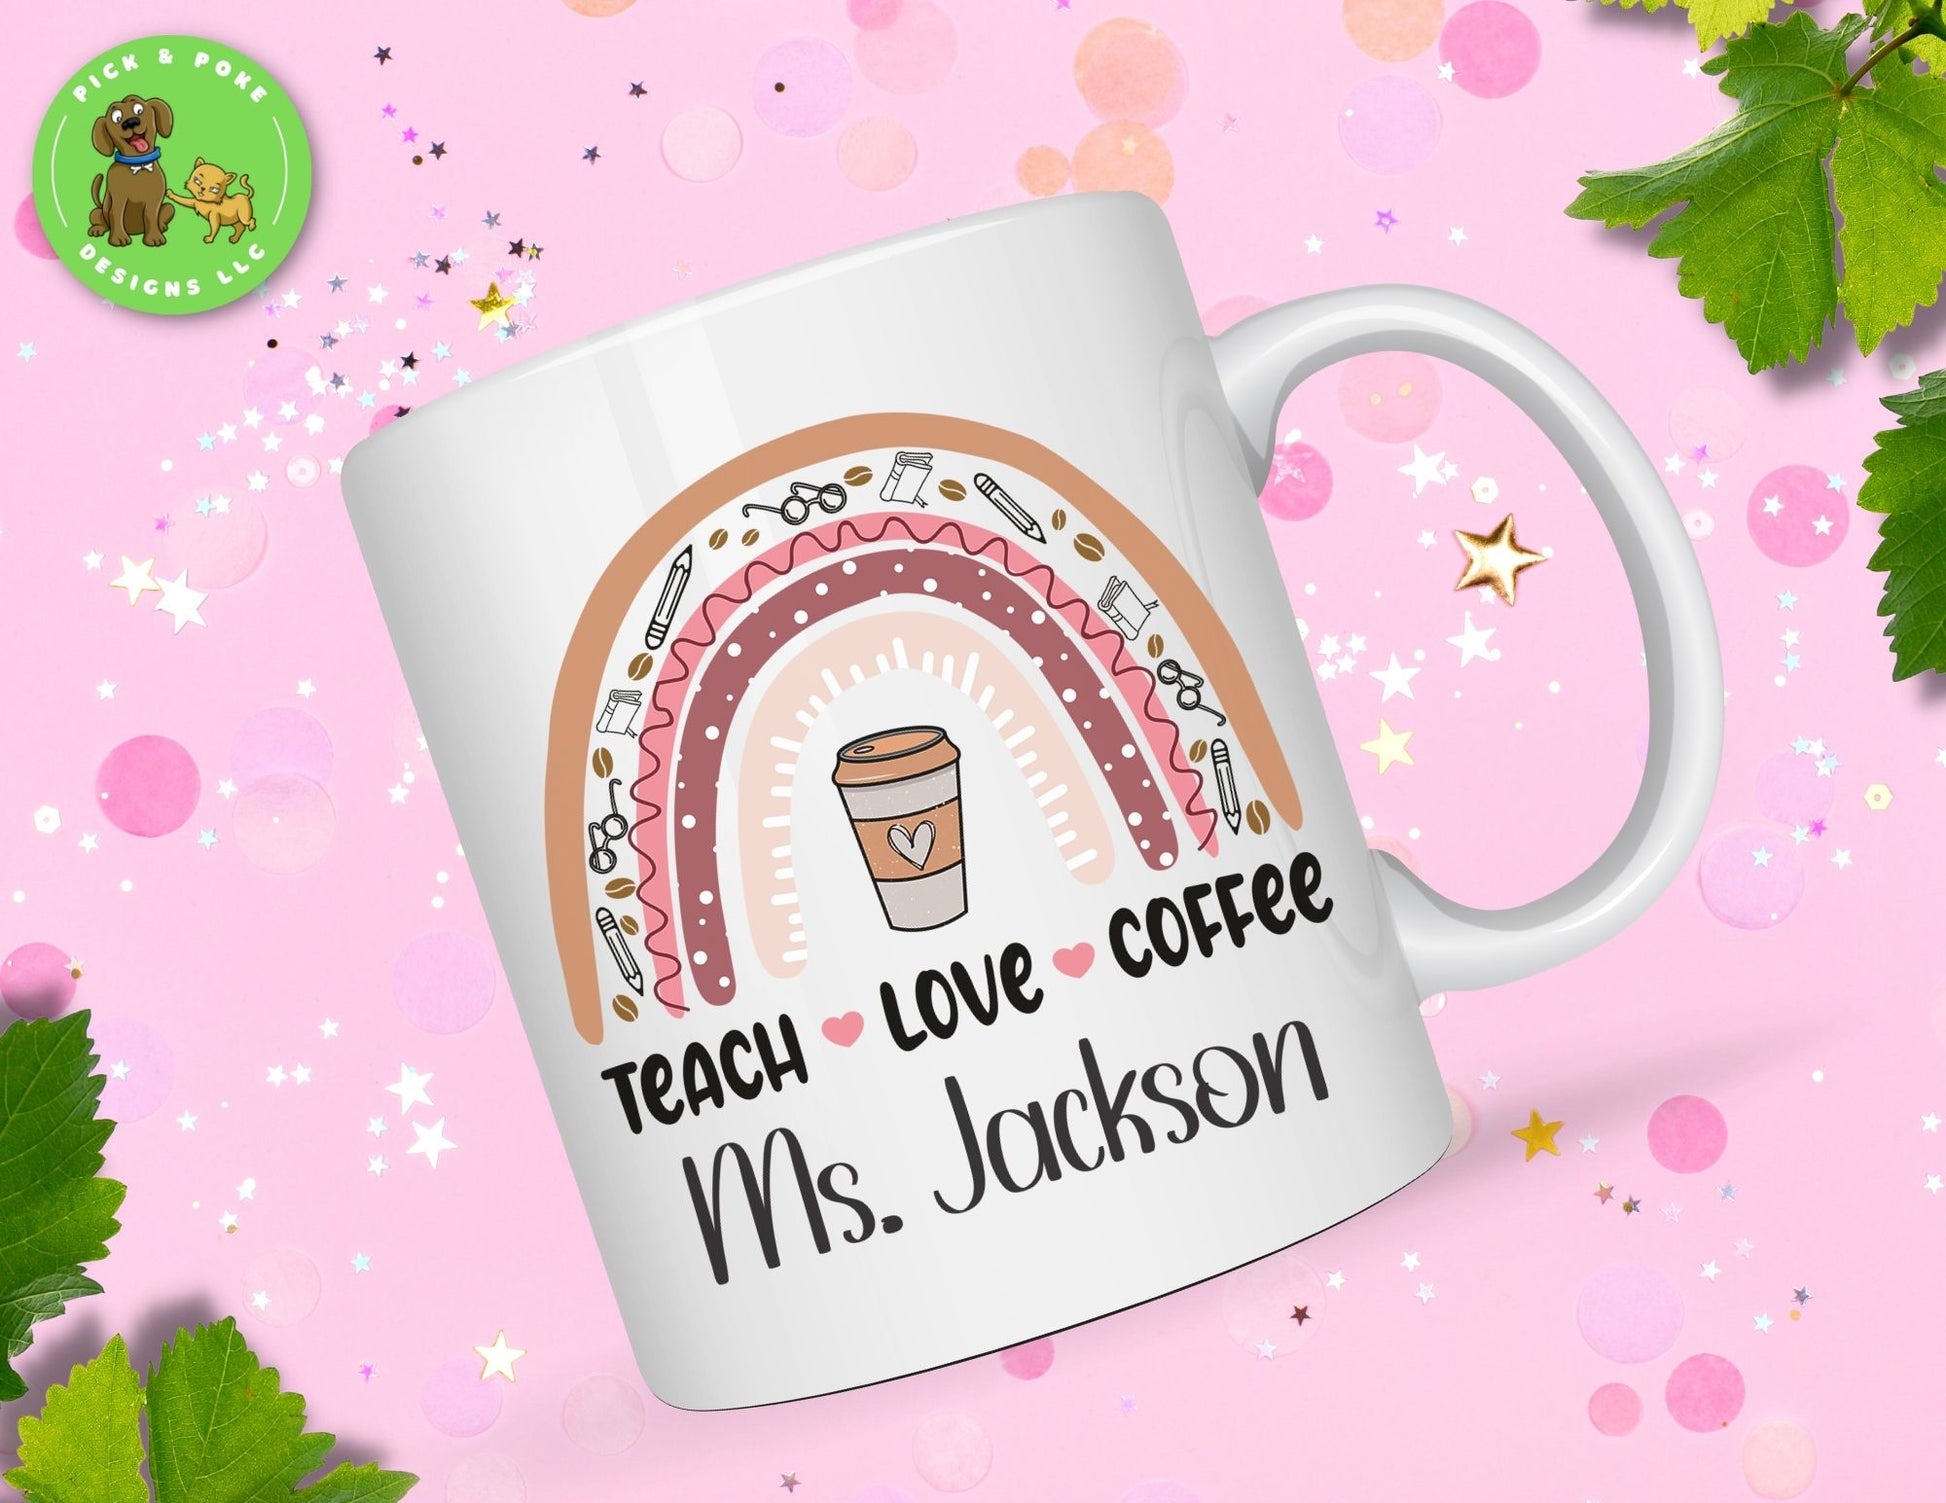 Teach Love Coffee mug features a rainbow design with school supplies and coffee cup. personalized with a name under the rainbow design.